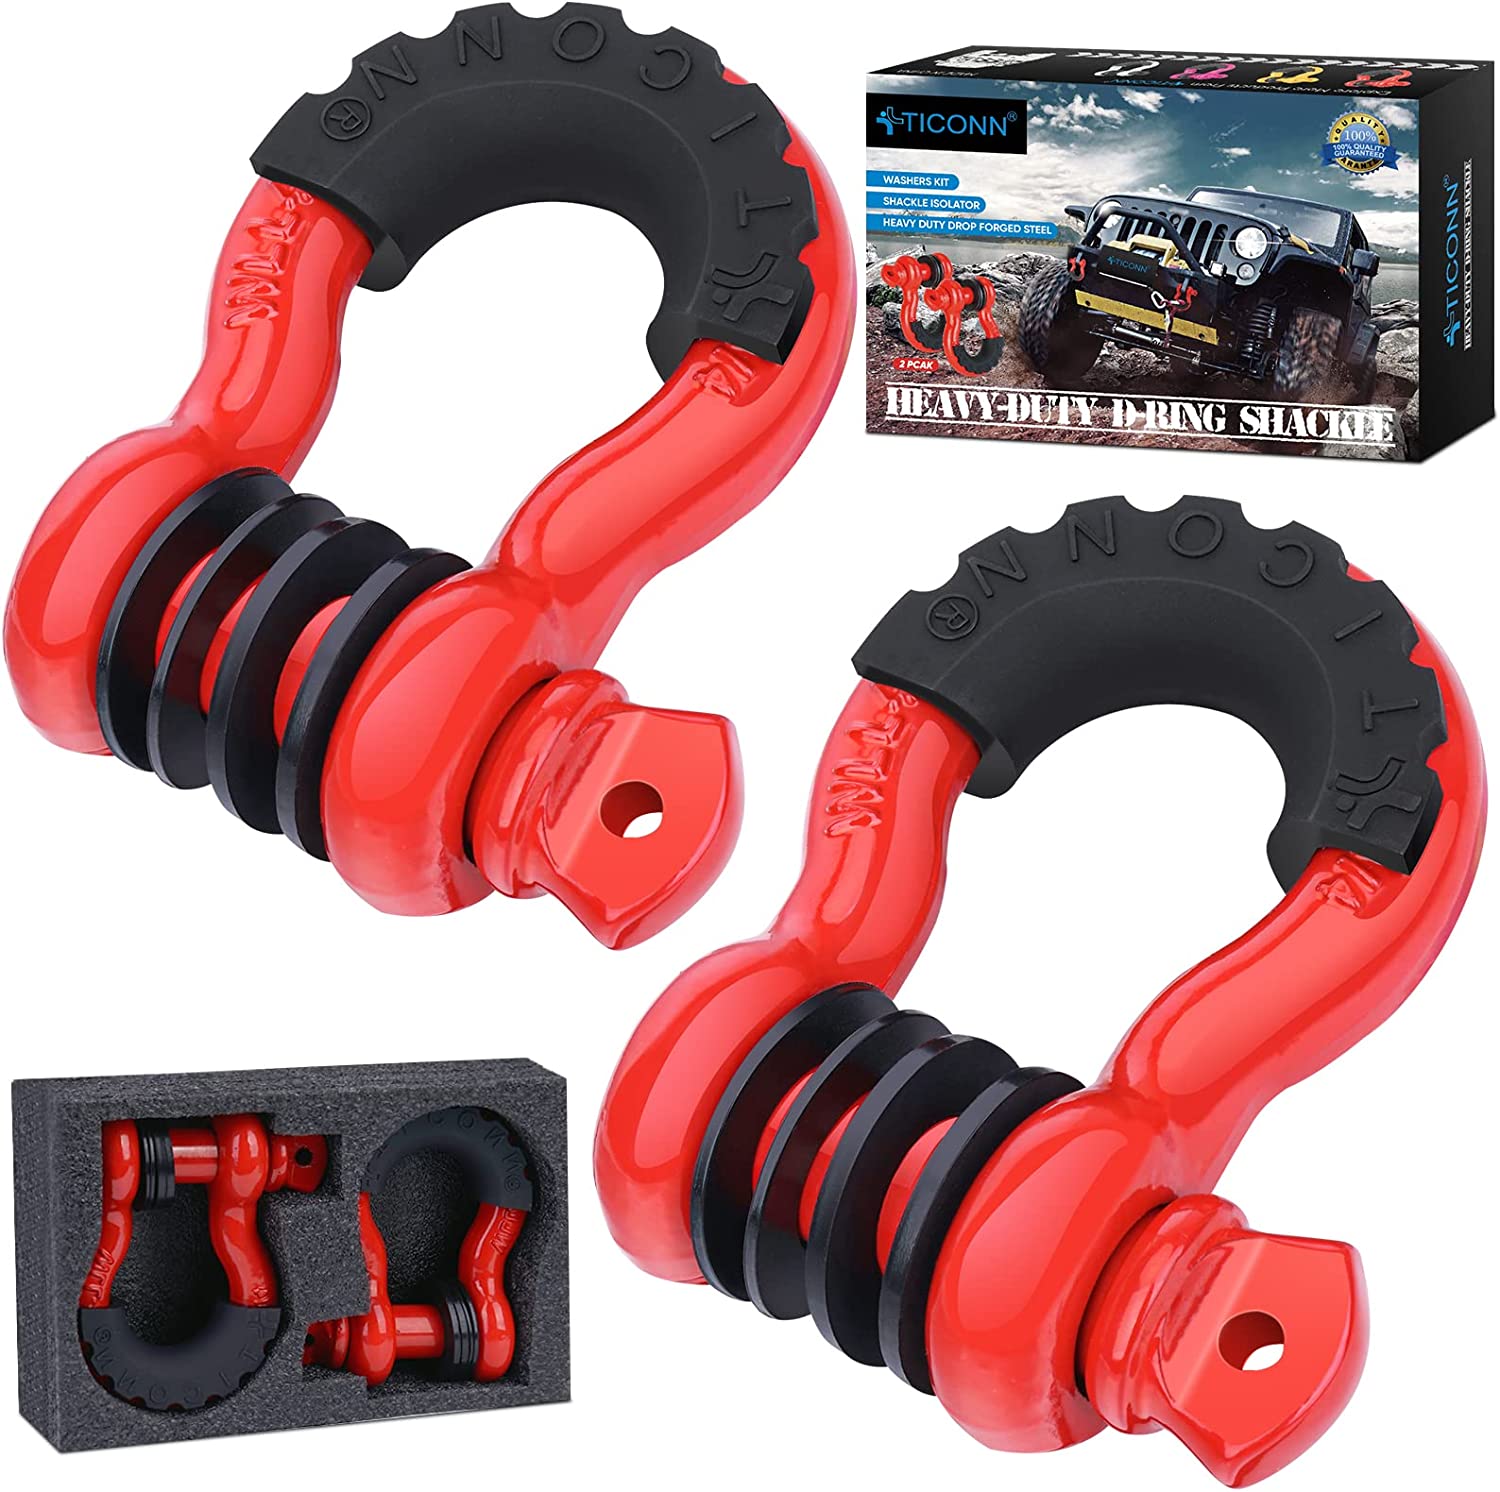 TICONN US has 2 Pack D Ring Shackle via Amazon for $11.97 + Free Shipping w/ Amazon Prime or Orders $25+ LIVE